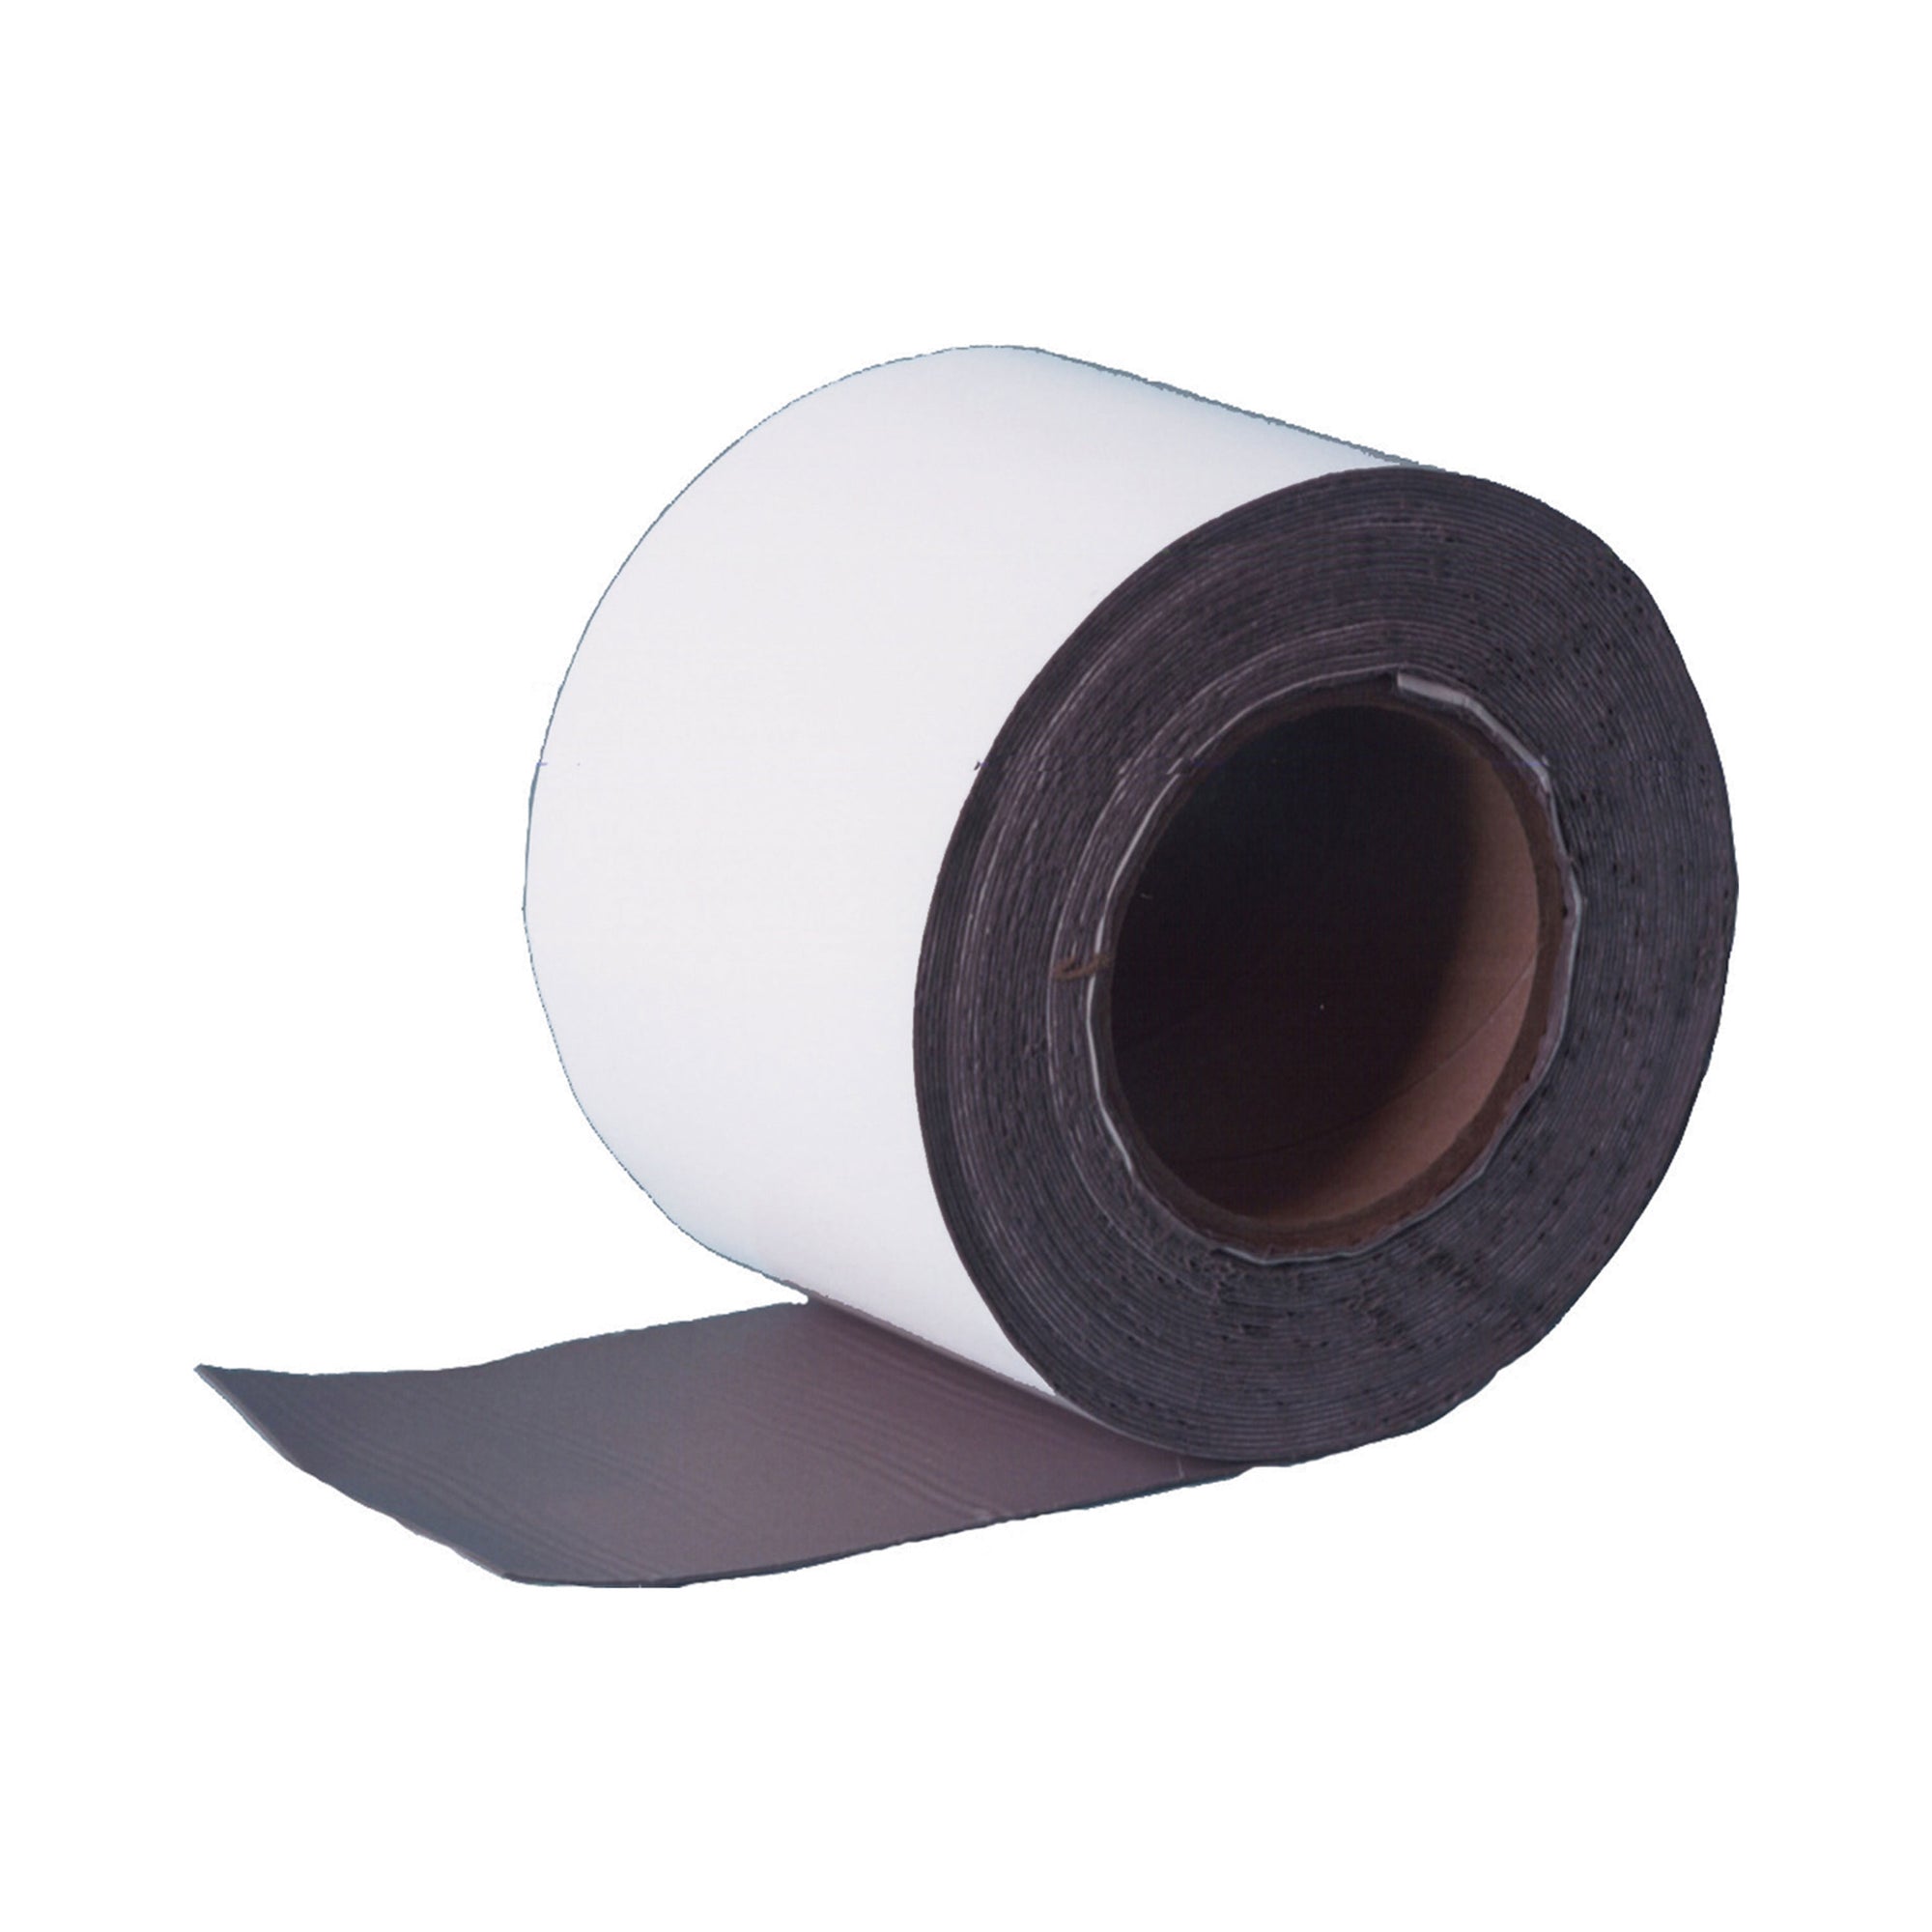 EternaBond RSW-6-50 RoofSeal Sealant Tape - 6" x 50', White